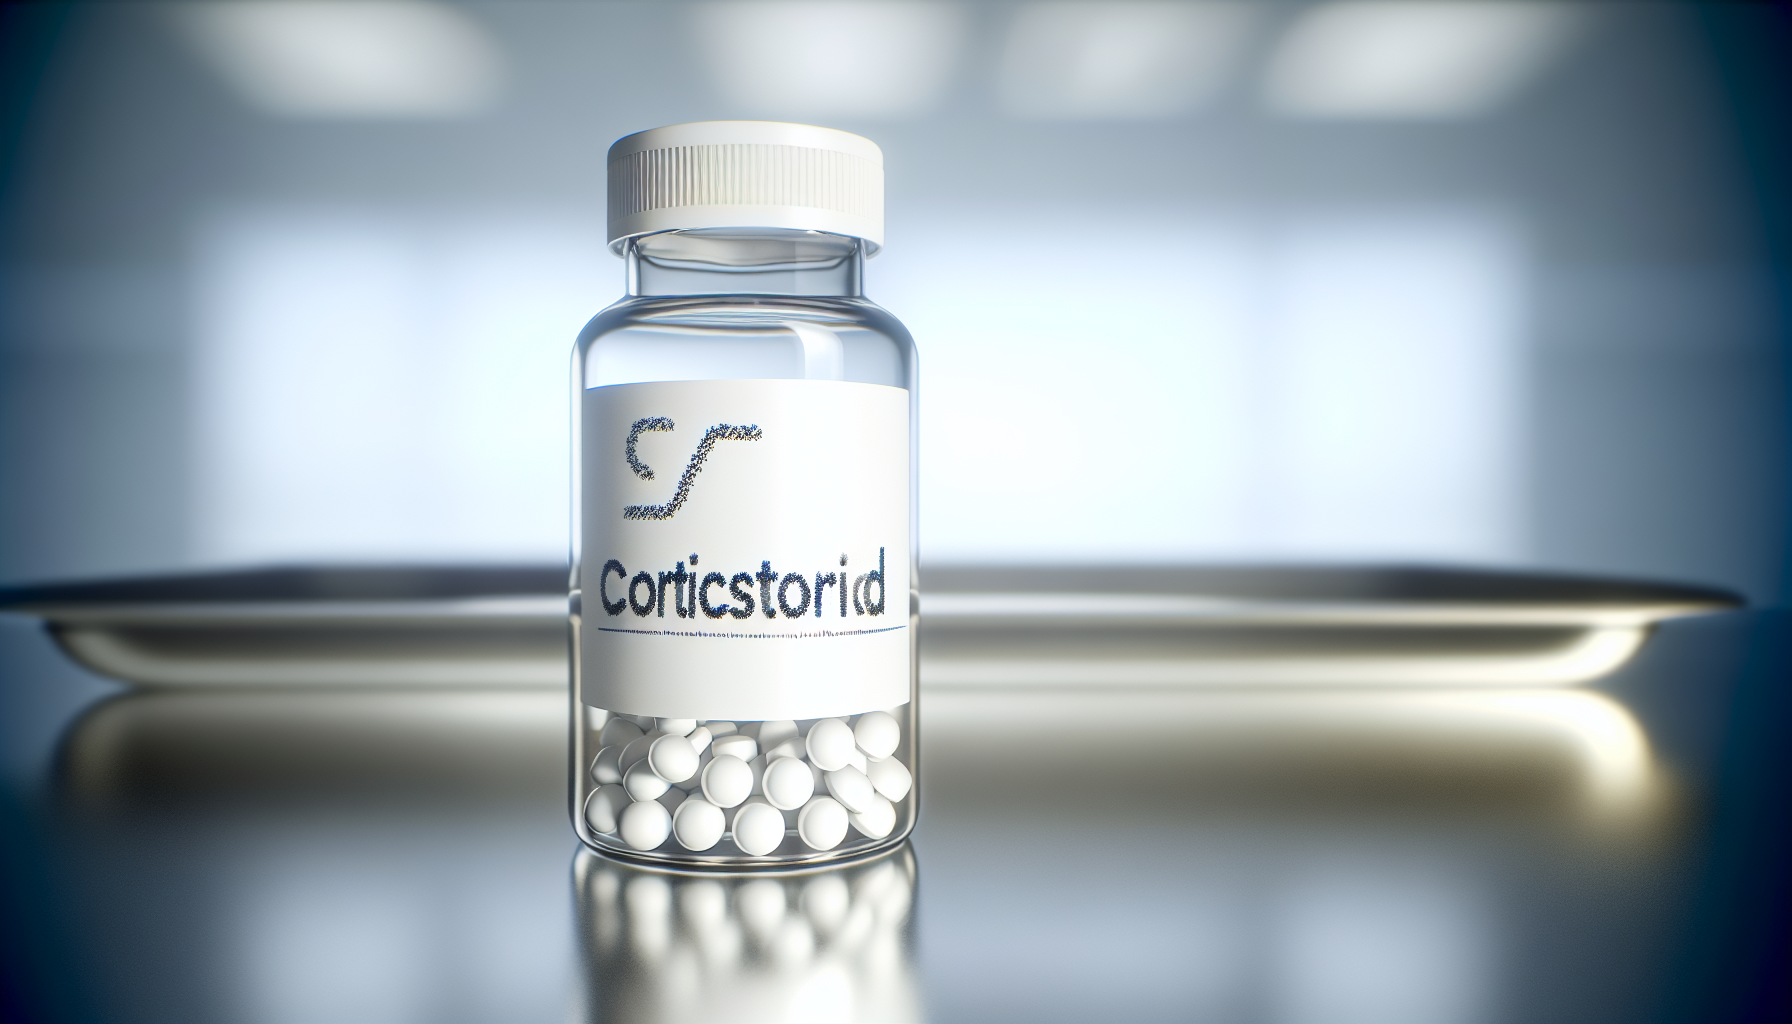 Bottle of corticosteroid medication for reducing inflammation